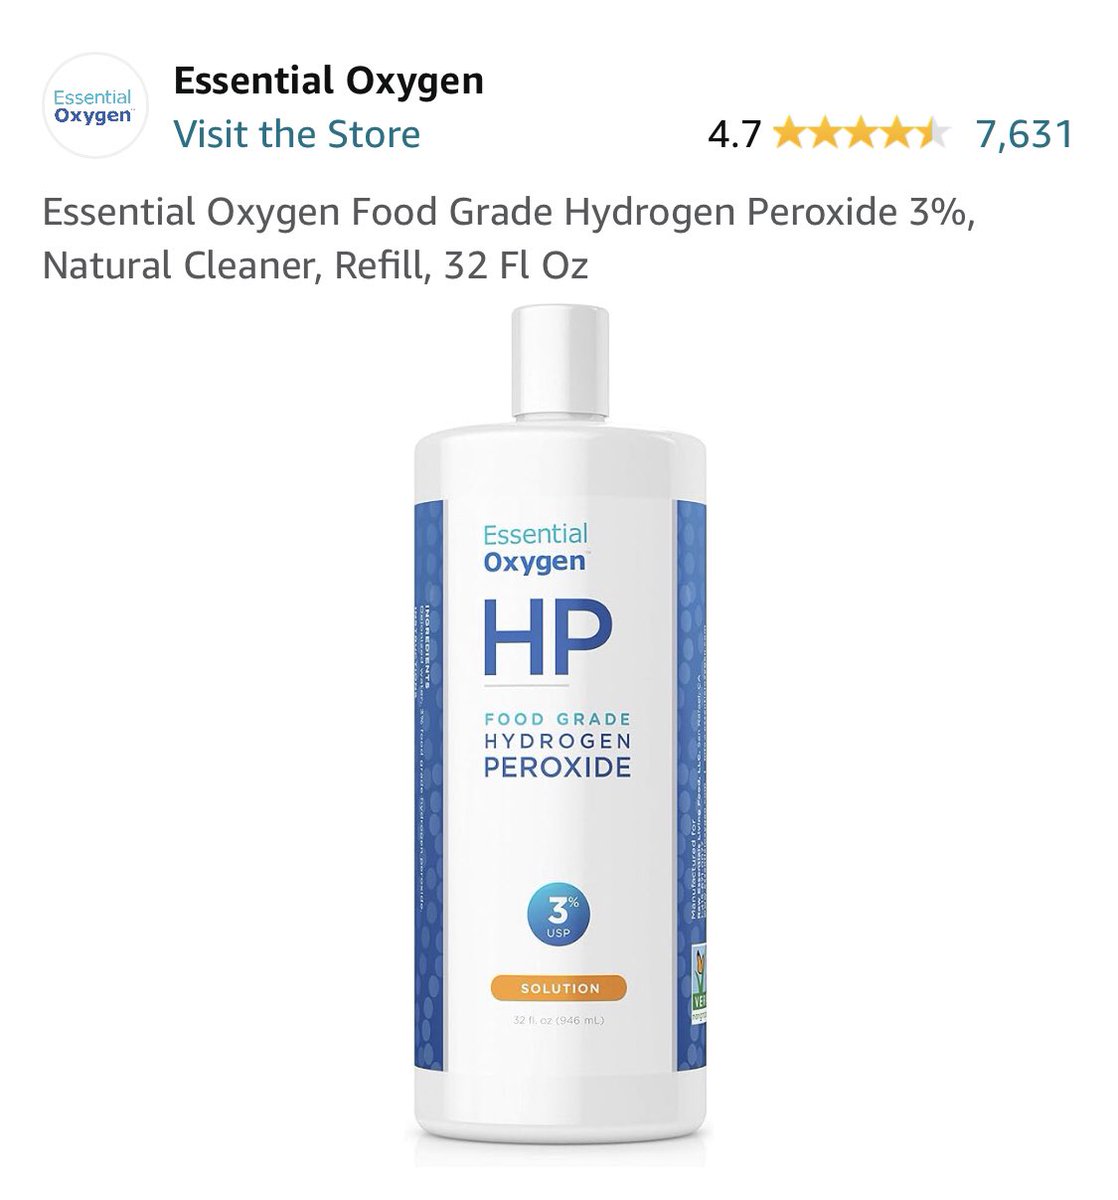 @BarbaraOneillAU Buy the food grade HP. The stuff in the brown bottle has stabilizers in it that are dangerous to swallow. Food grade is 3% and safe. I make a paste with food grade HP and baking soda to brush my teeth with a few times a week. My gums and teeth are super healthy.